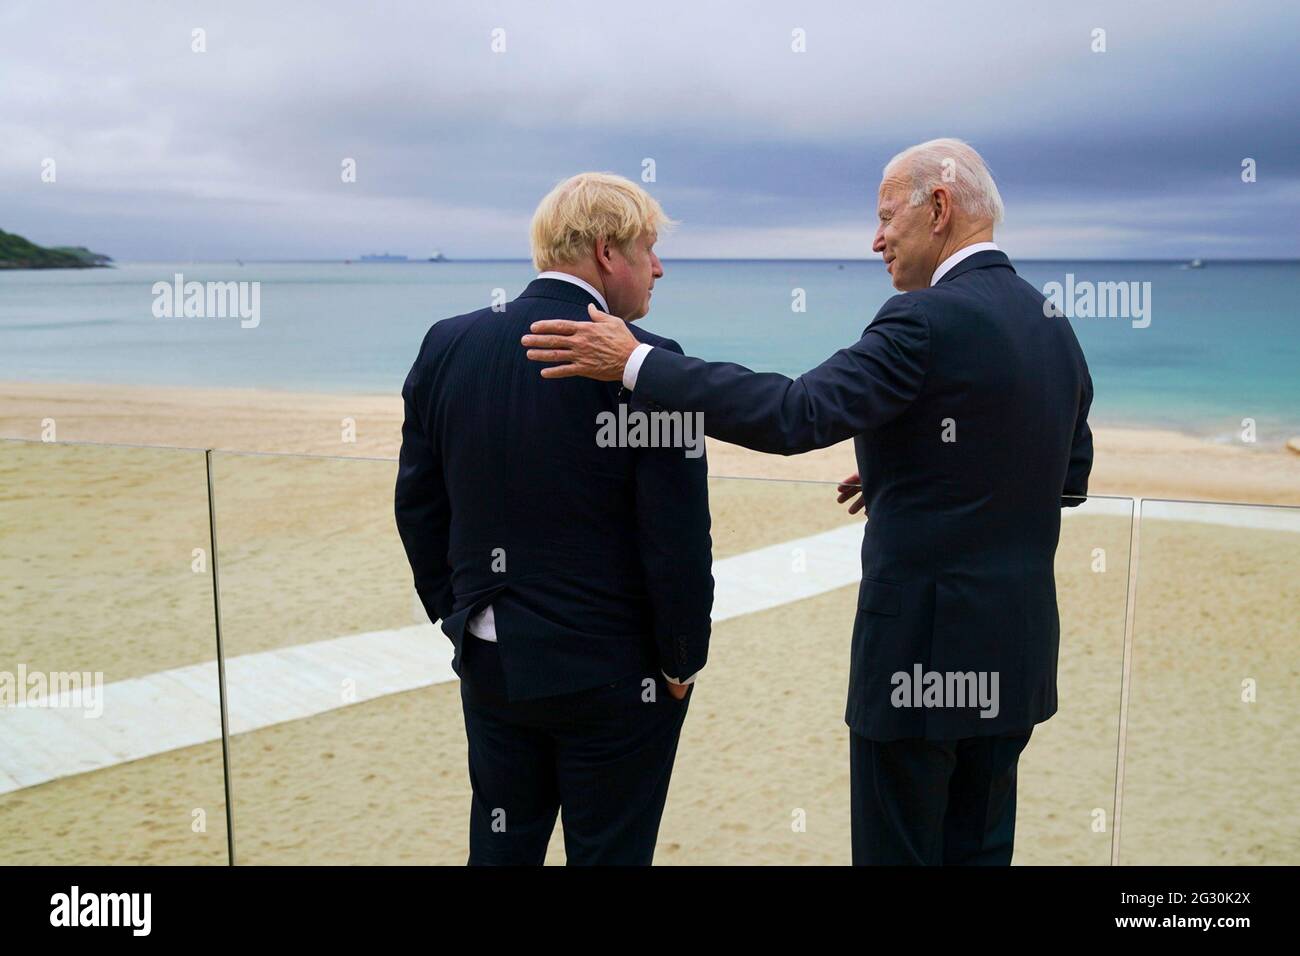 U.S President Joe Biden talks with Prime Minister Boris Johnson, left, during a walk ahead of the G7 Summit at the Carbis Bay Hotel, June 10, 2021 in Carbis Bay, Cornwall, United Kingdom. Stock Photo